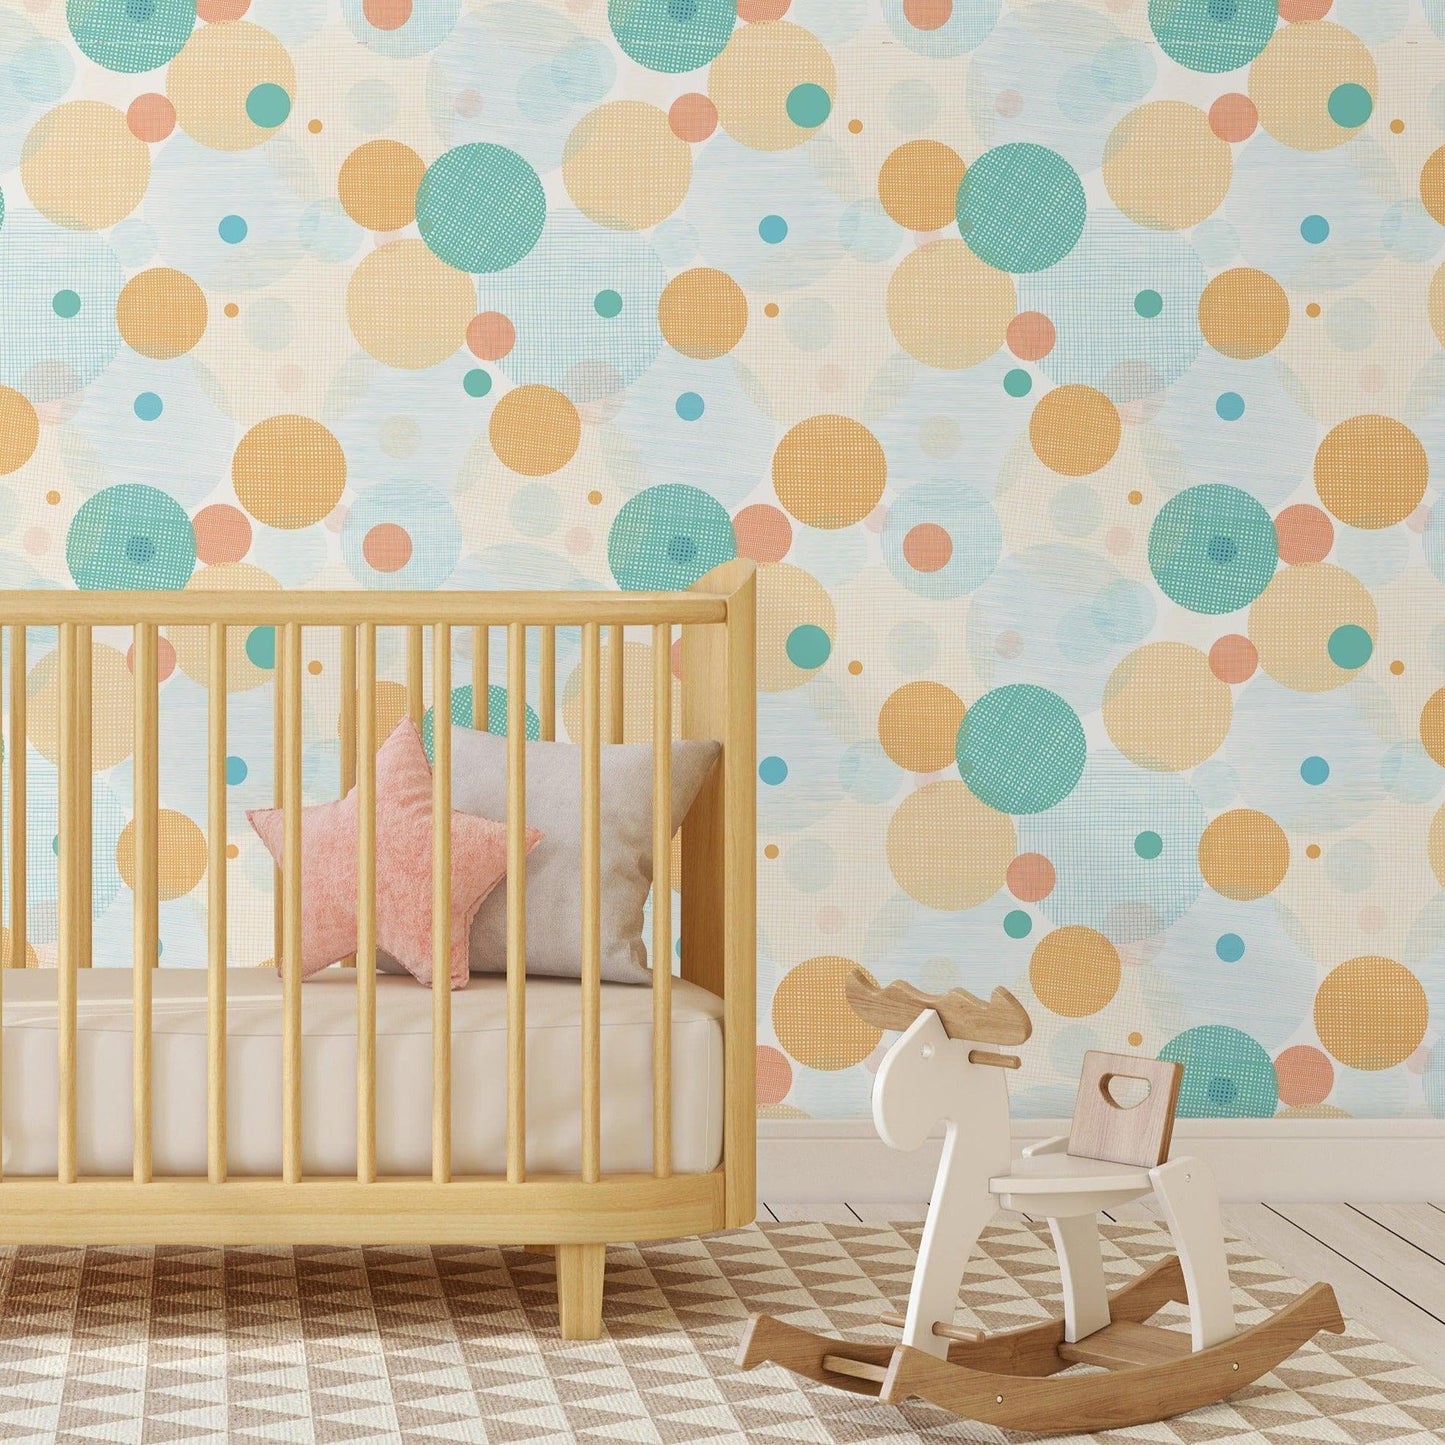 Colorful Fabric Print Circles Removable Wallpaper Colorful Fabric Print Circles Removable Wallpaper Colorful Fabric Print Circles Removable Wallpaper 